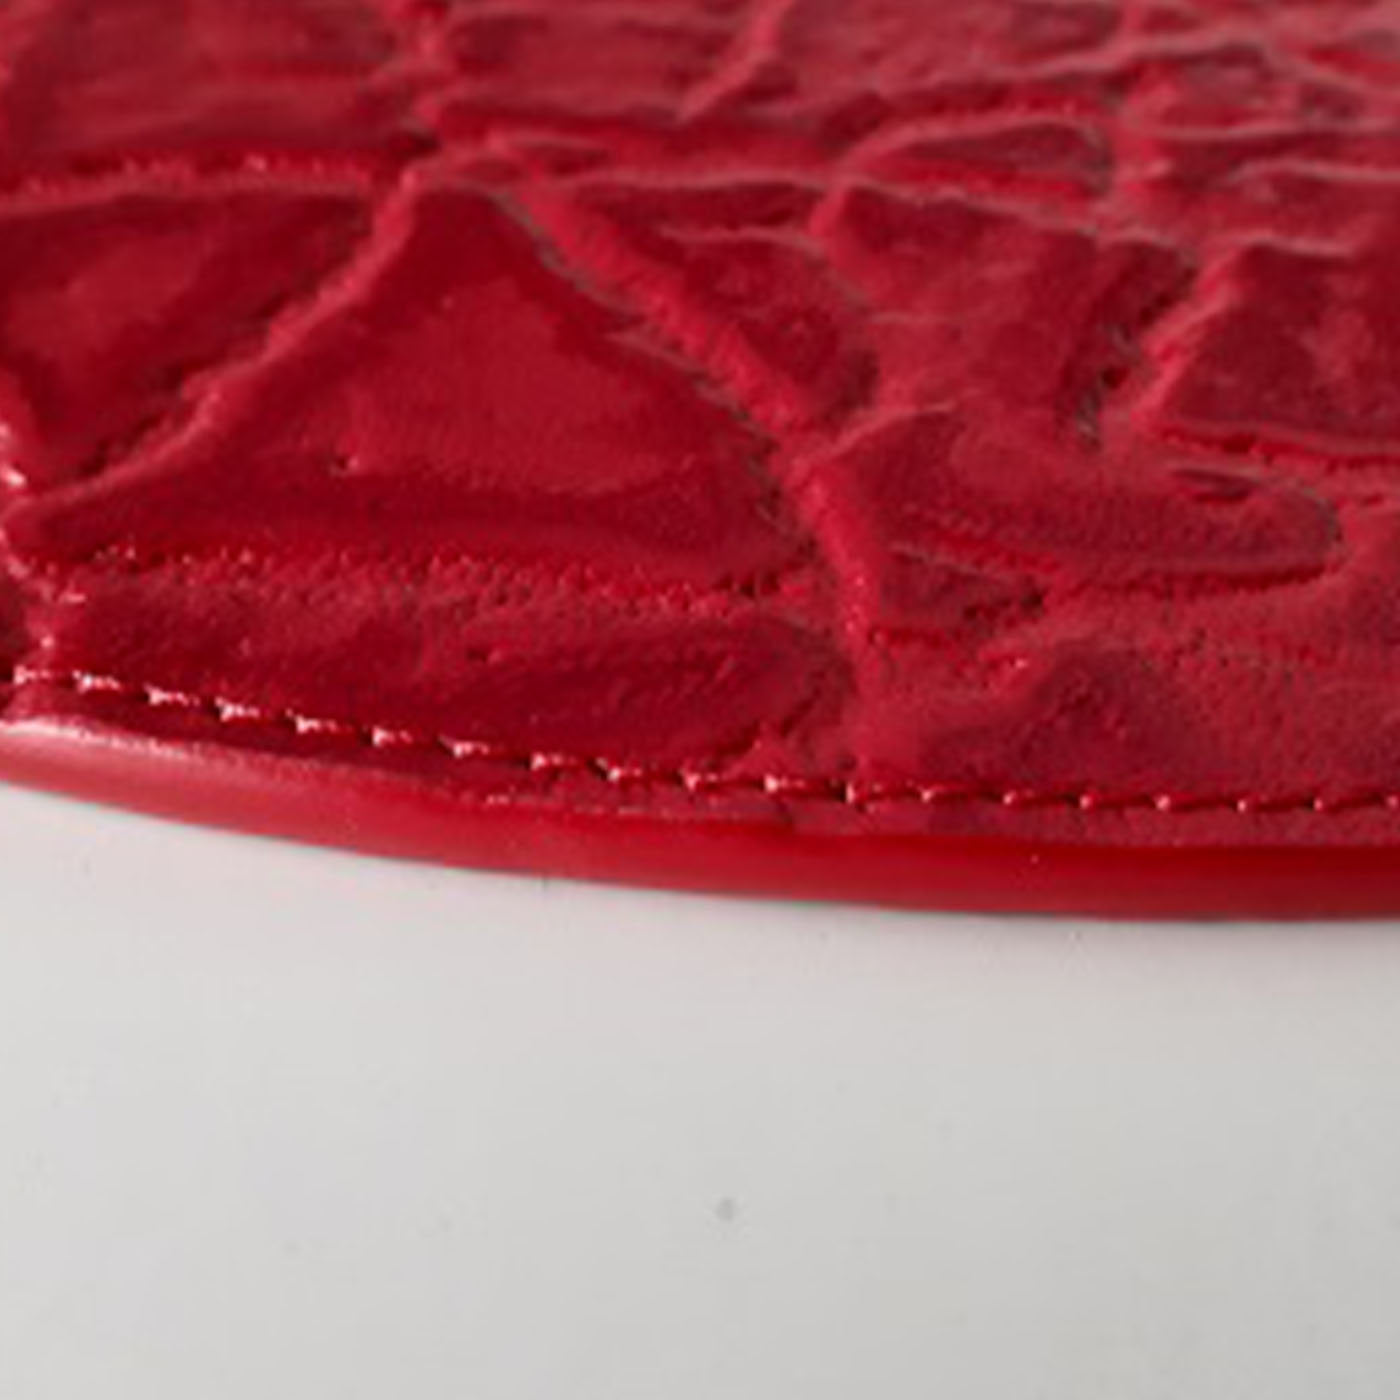 Tanzania Medium Set of 2 Red Leather Placemats - Alternative view 4